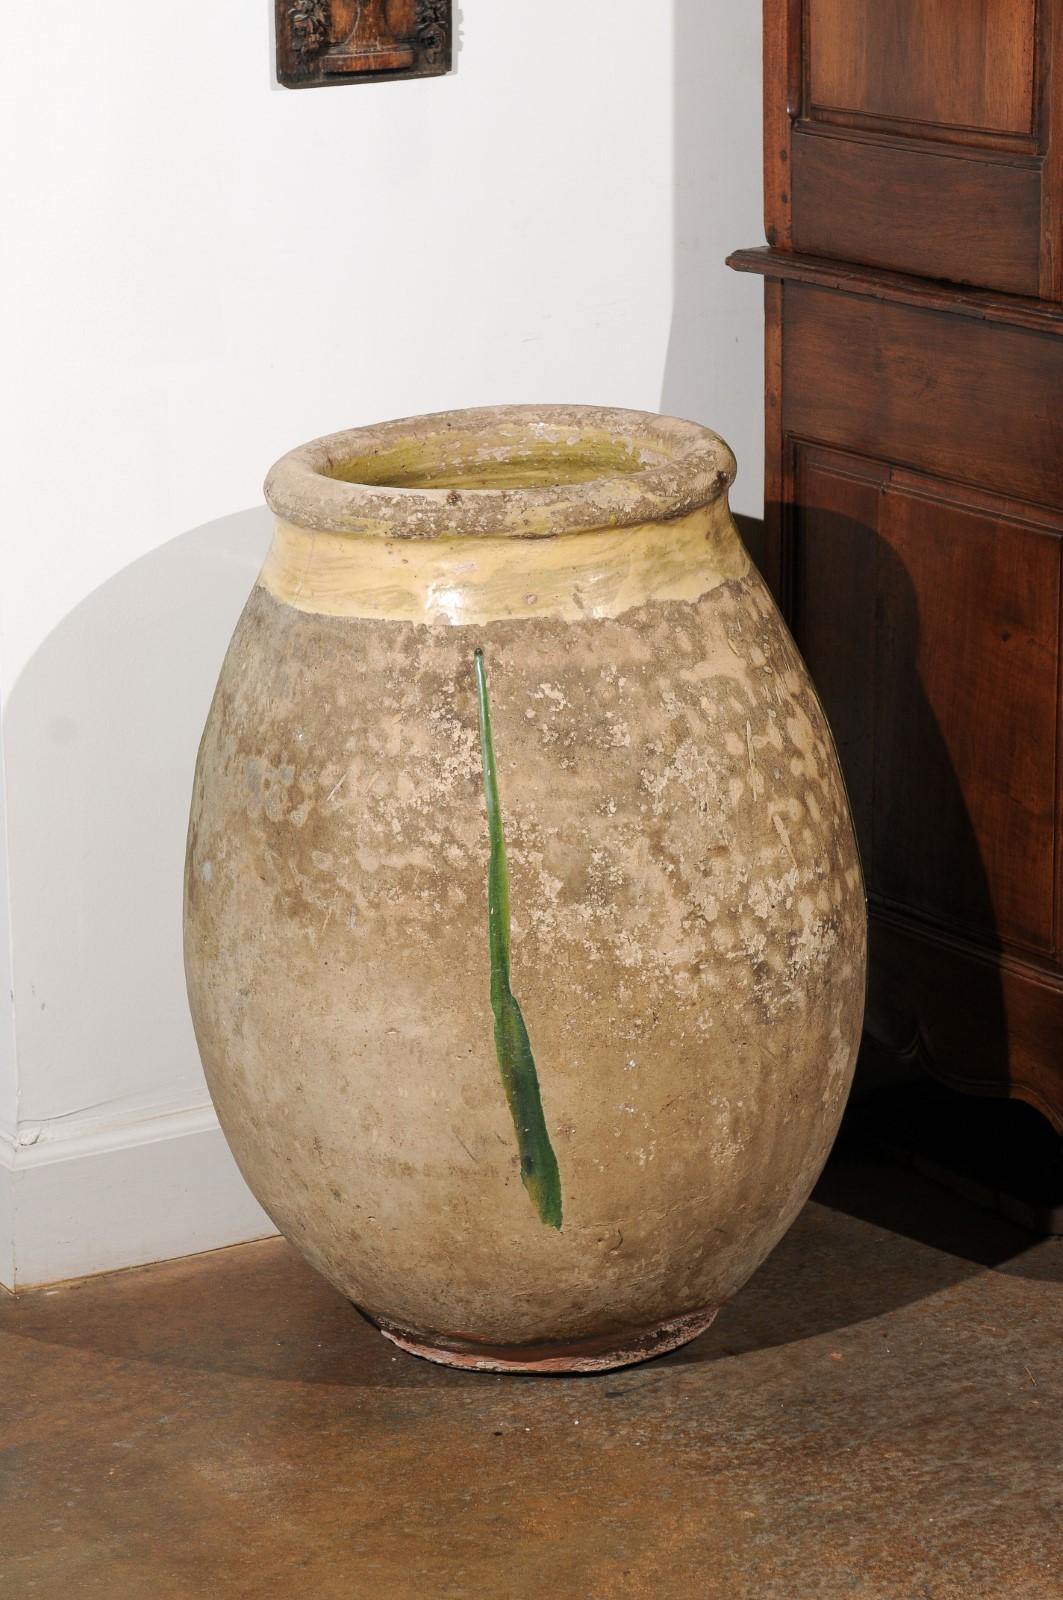 A French Provincial large size terracotta jar from Biot, Provence with yellow glaze and green drip from the 19th century. Created in Southern France during the 19th century, the olive jar features a recognizable round shape, showcasing yellow glaze